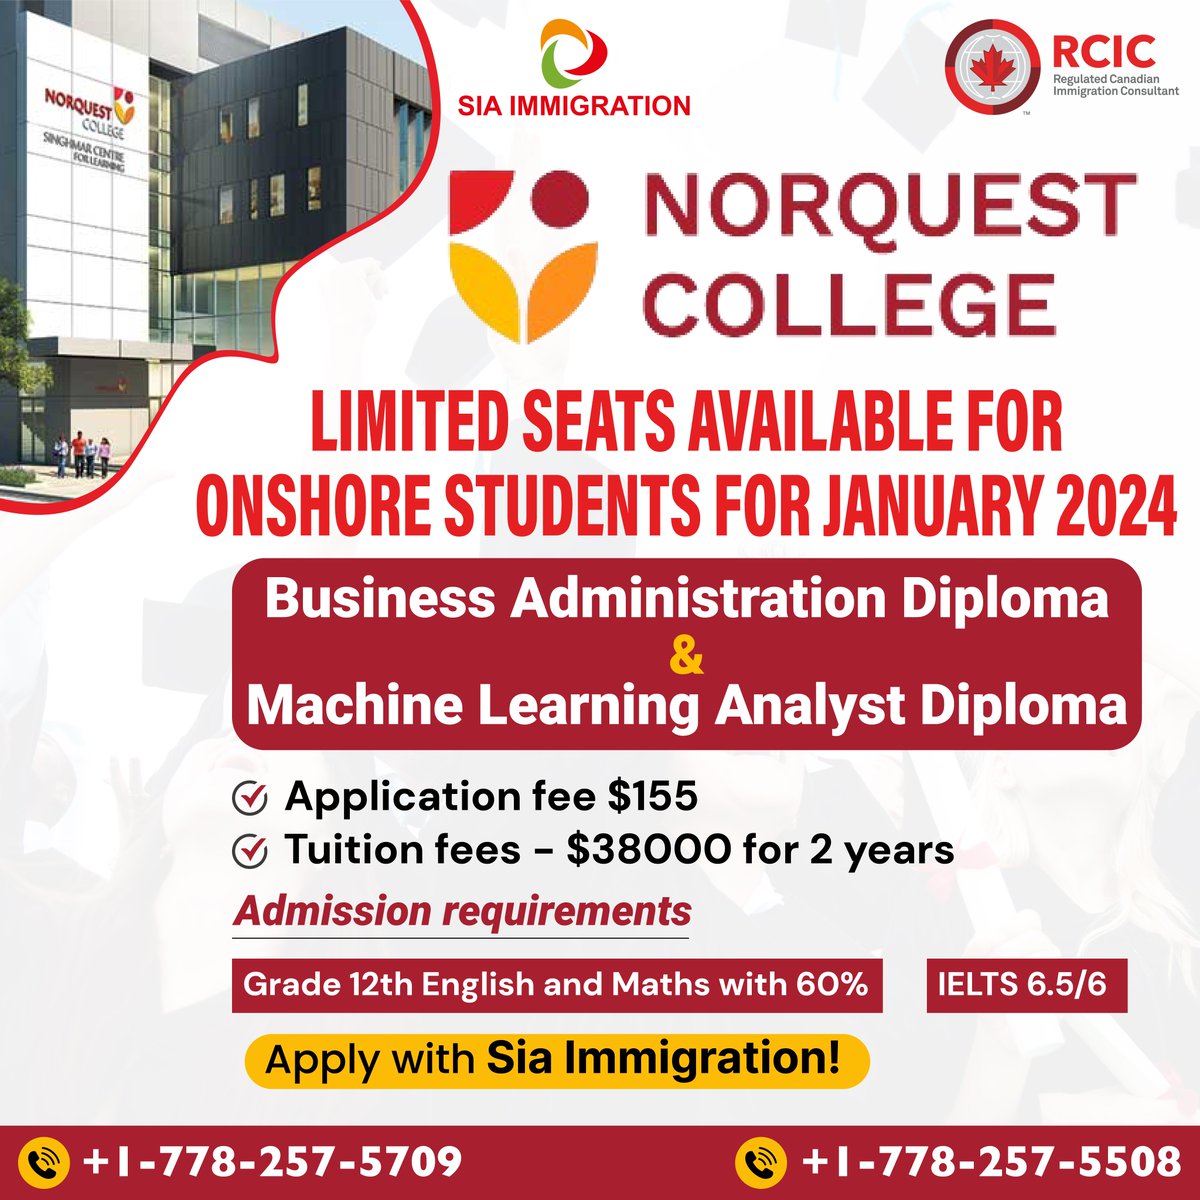 Limited seats are available for Onshore students for January 2024.

Apply with Sia Immigration Now @ +1-778-257-5508, +1-778-257-5709
visit: siaimmigration.com
#NorquestCollege #SiaImmigration #BusinessAdministration #machinelearningdiploma #DiplomaCourses #canada